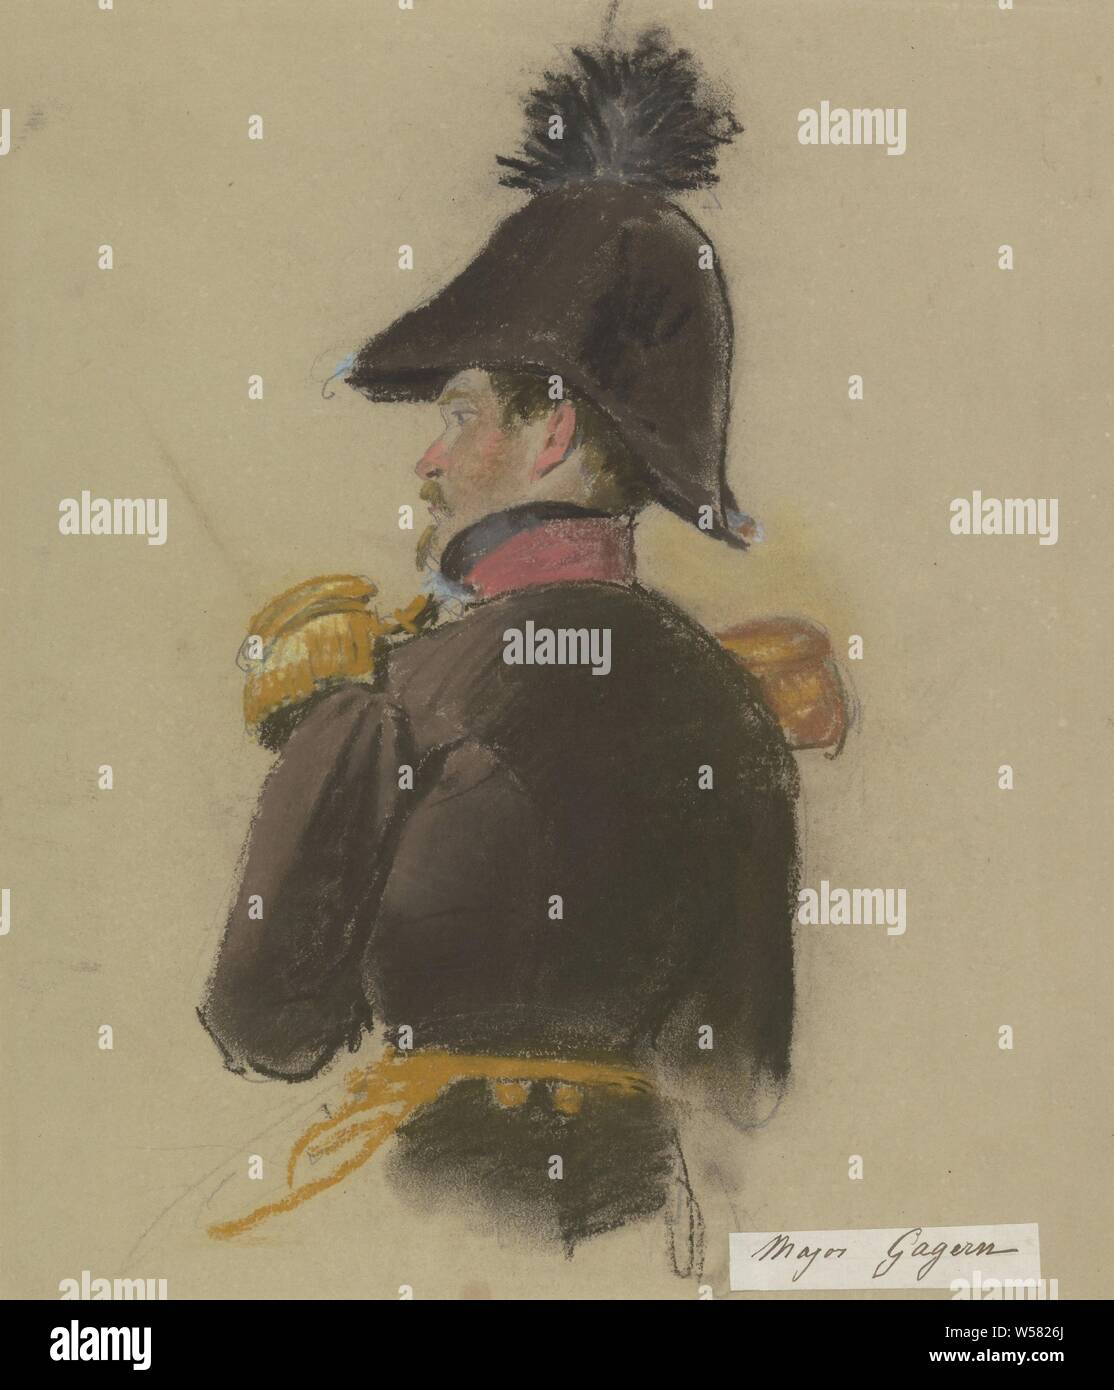 Major von Gagern, seen from the back, officer (with NAME or rank), historical person (MAJOR VON GAGERN) - historical person (MAJOR VON GAGERN) portrayed, Major Van Gagern, Jacob Joseph Eeckhout, 1803 - 1861, paper, h 305 mm × w 261 mm Stock Photo